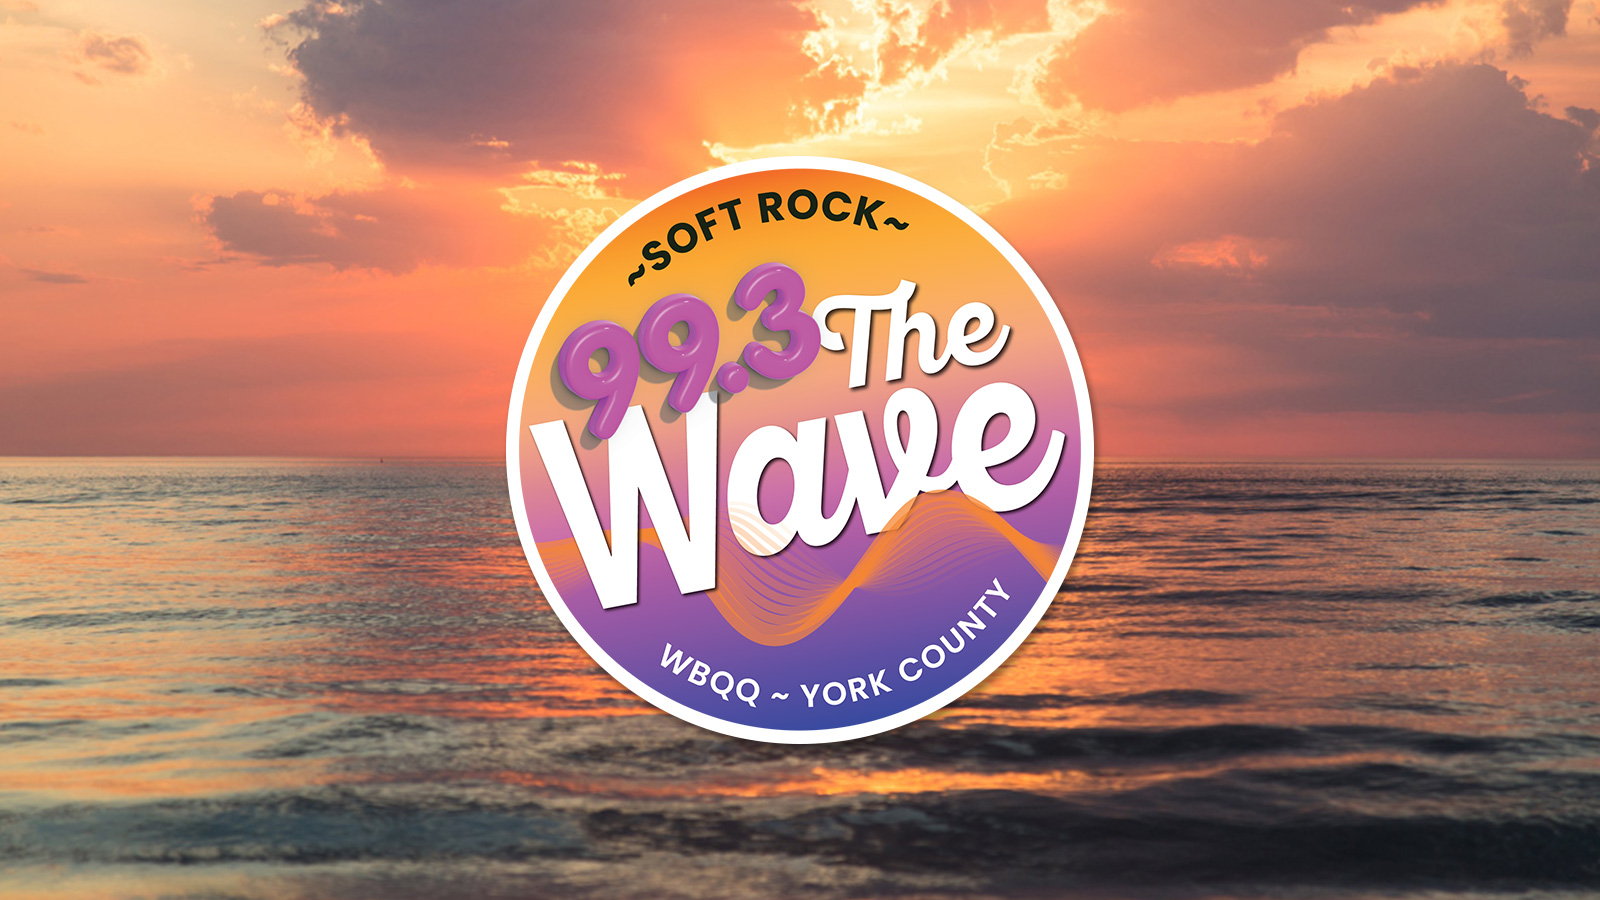 Binnie Media Launches ‘The Wave’ in Maine